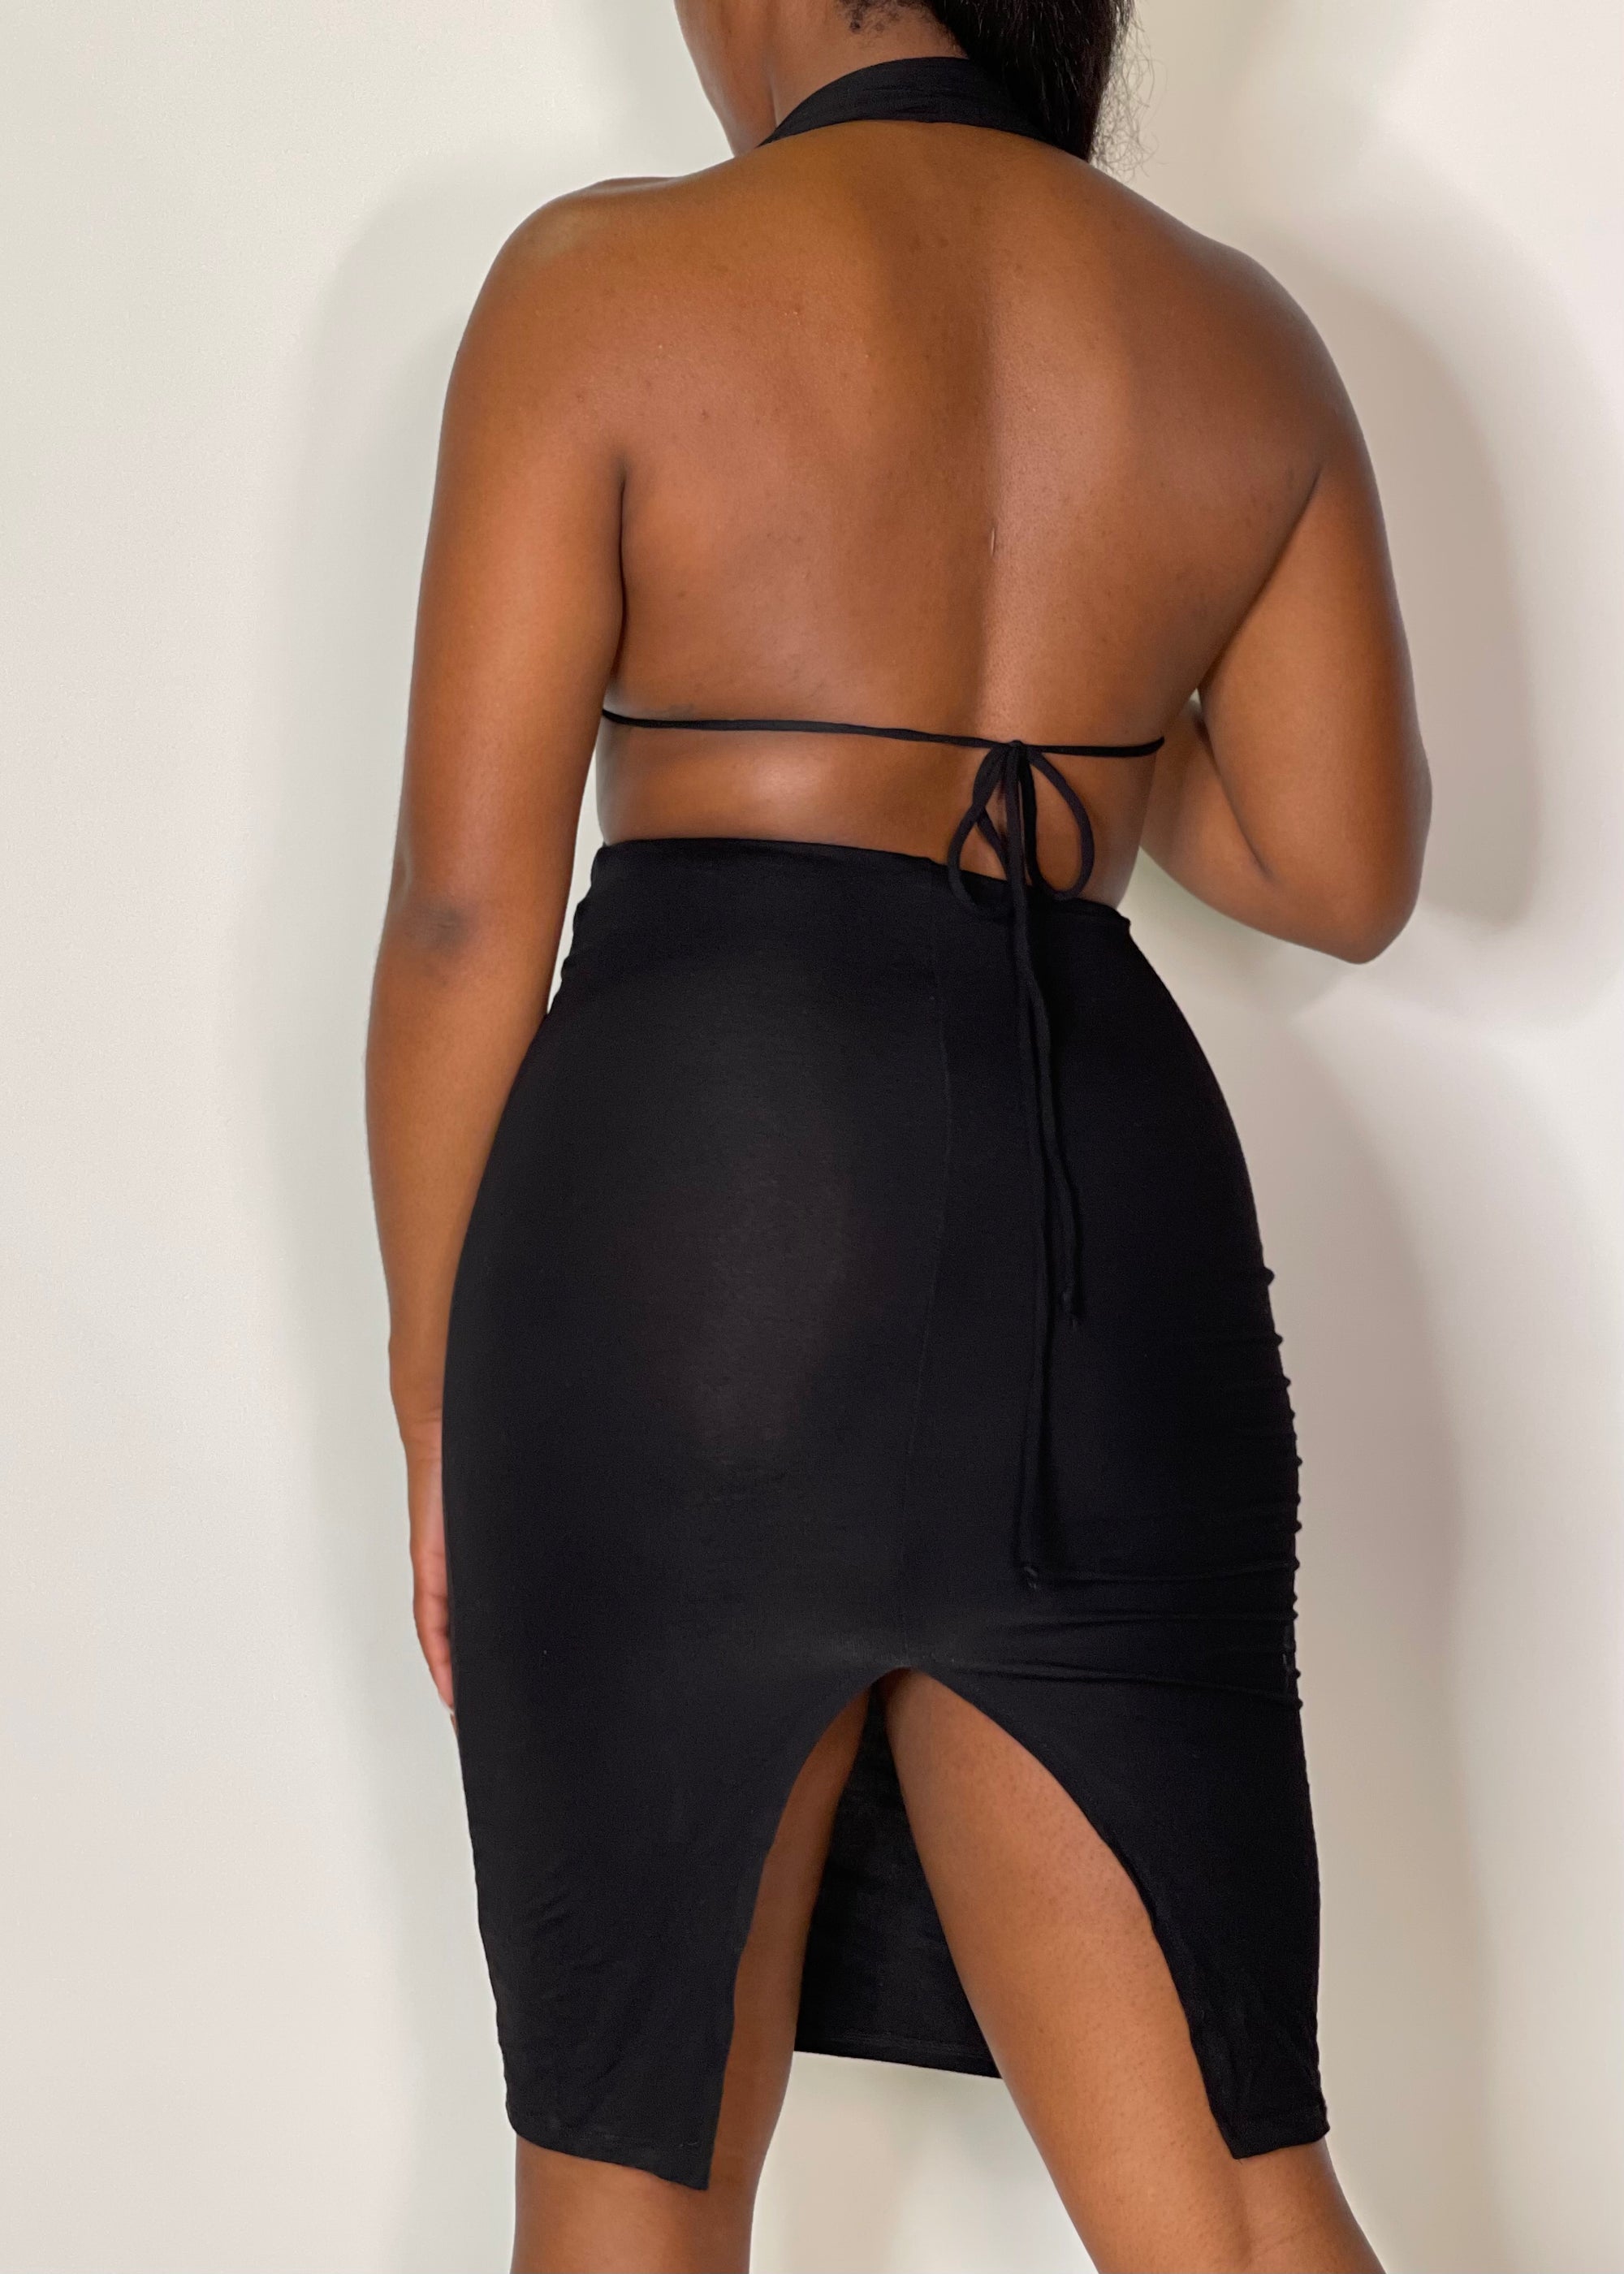 The Tied Up Bodycon Dress